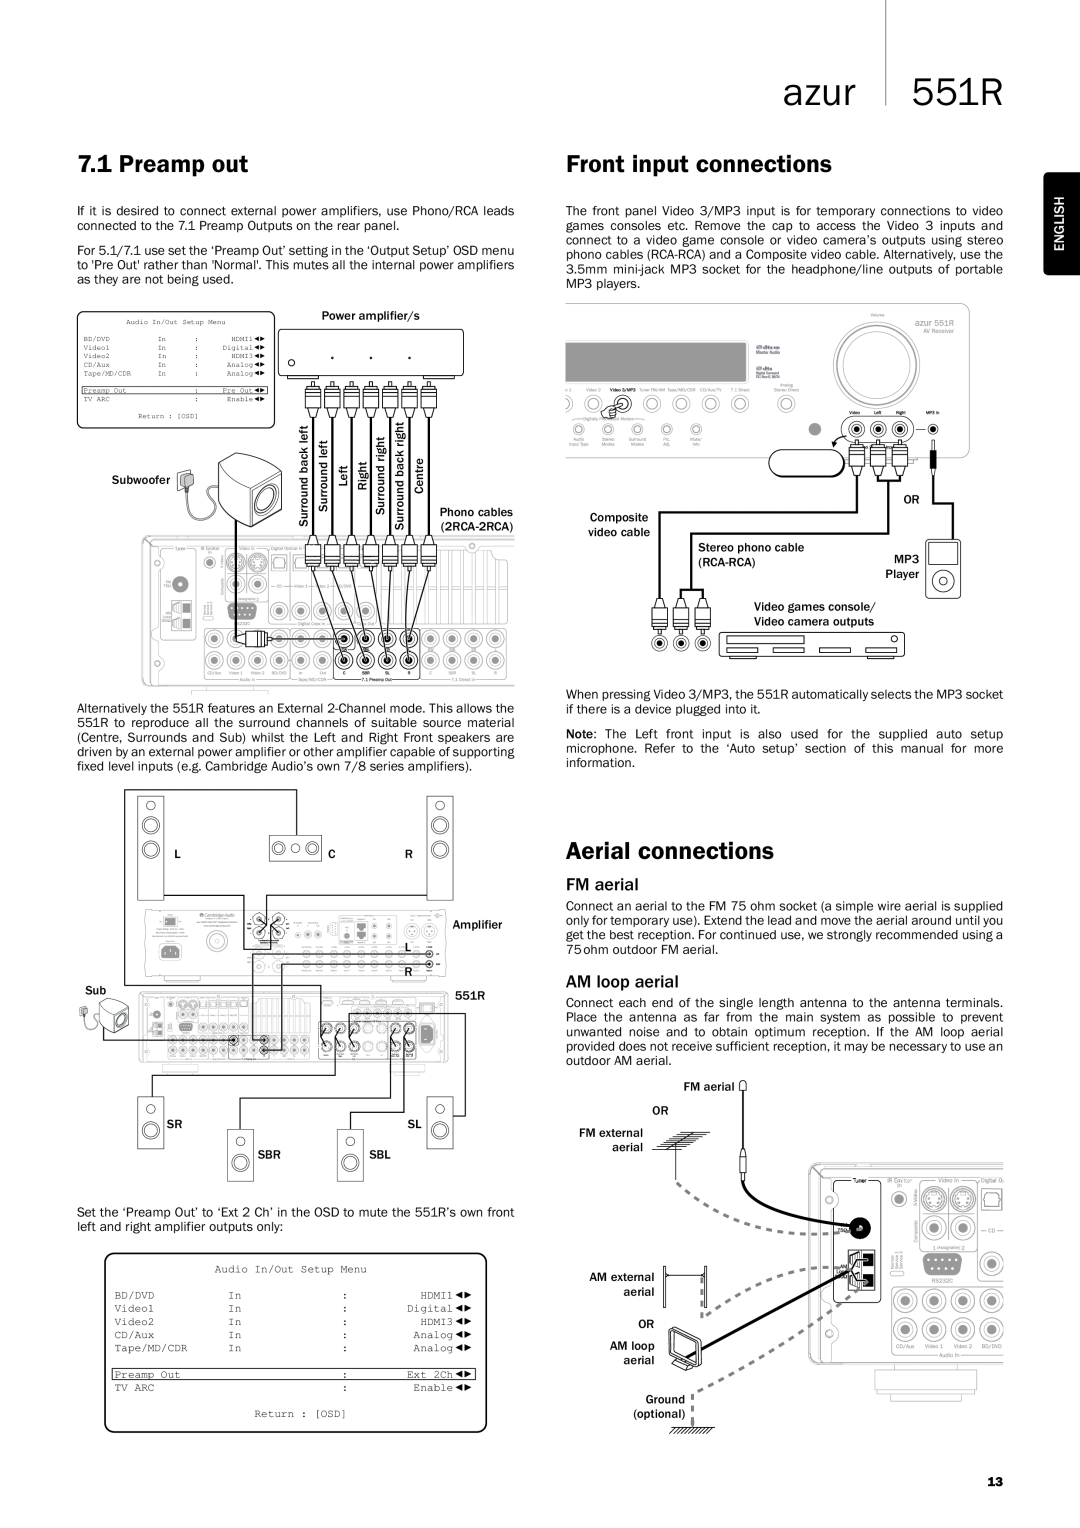 Cambridge Audio 551R user manual 7.1Preampout, Frontinputconnections, Aerialconnections, azur 